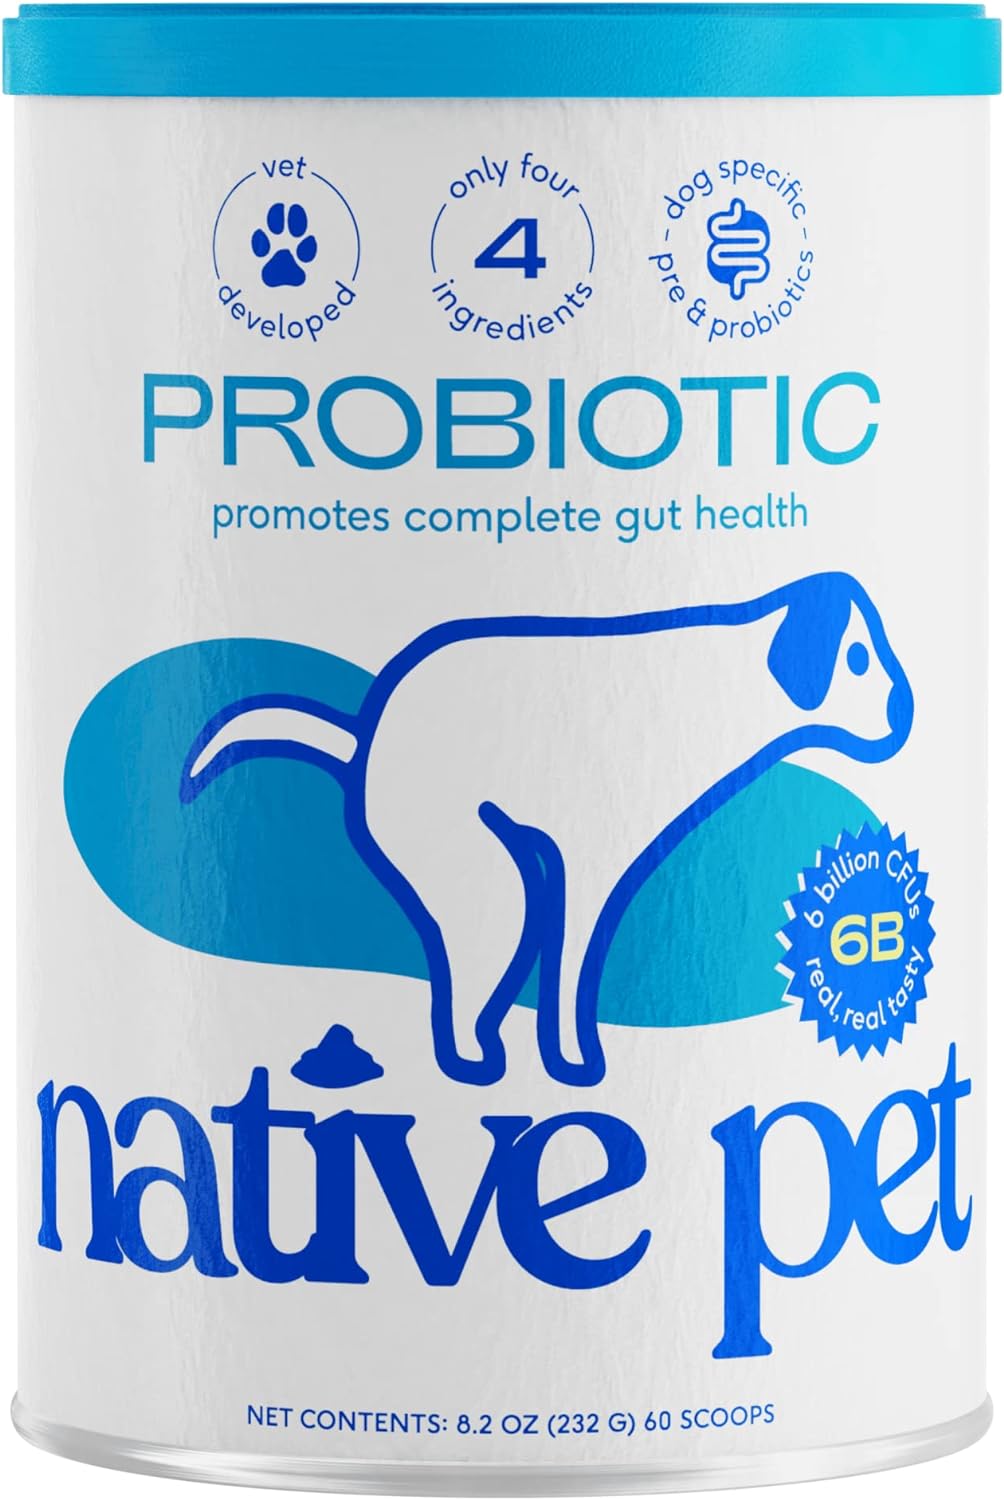 Native Pet Probiotic for Dogs